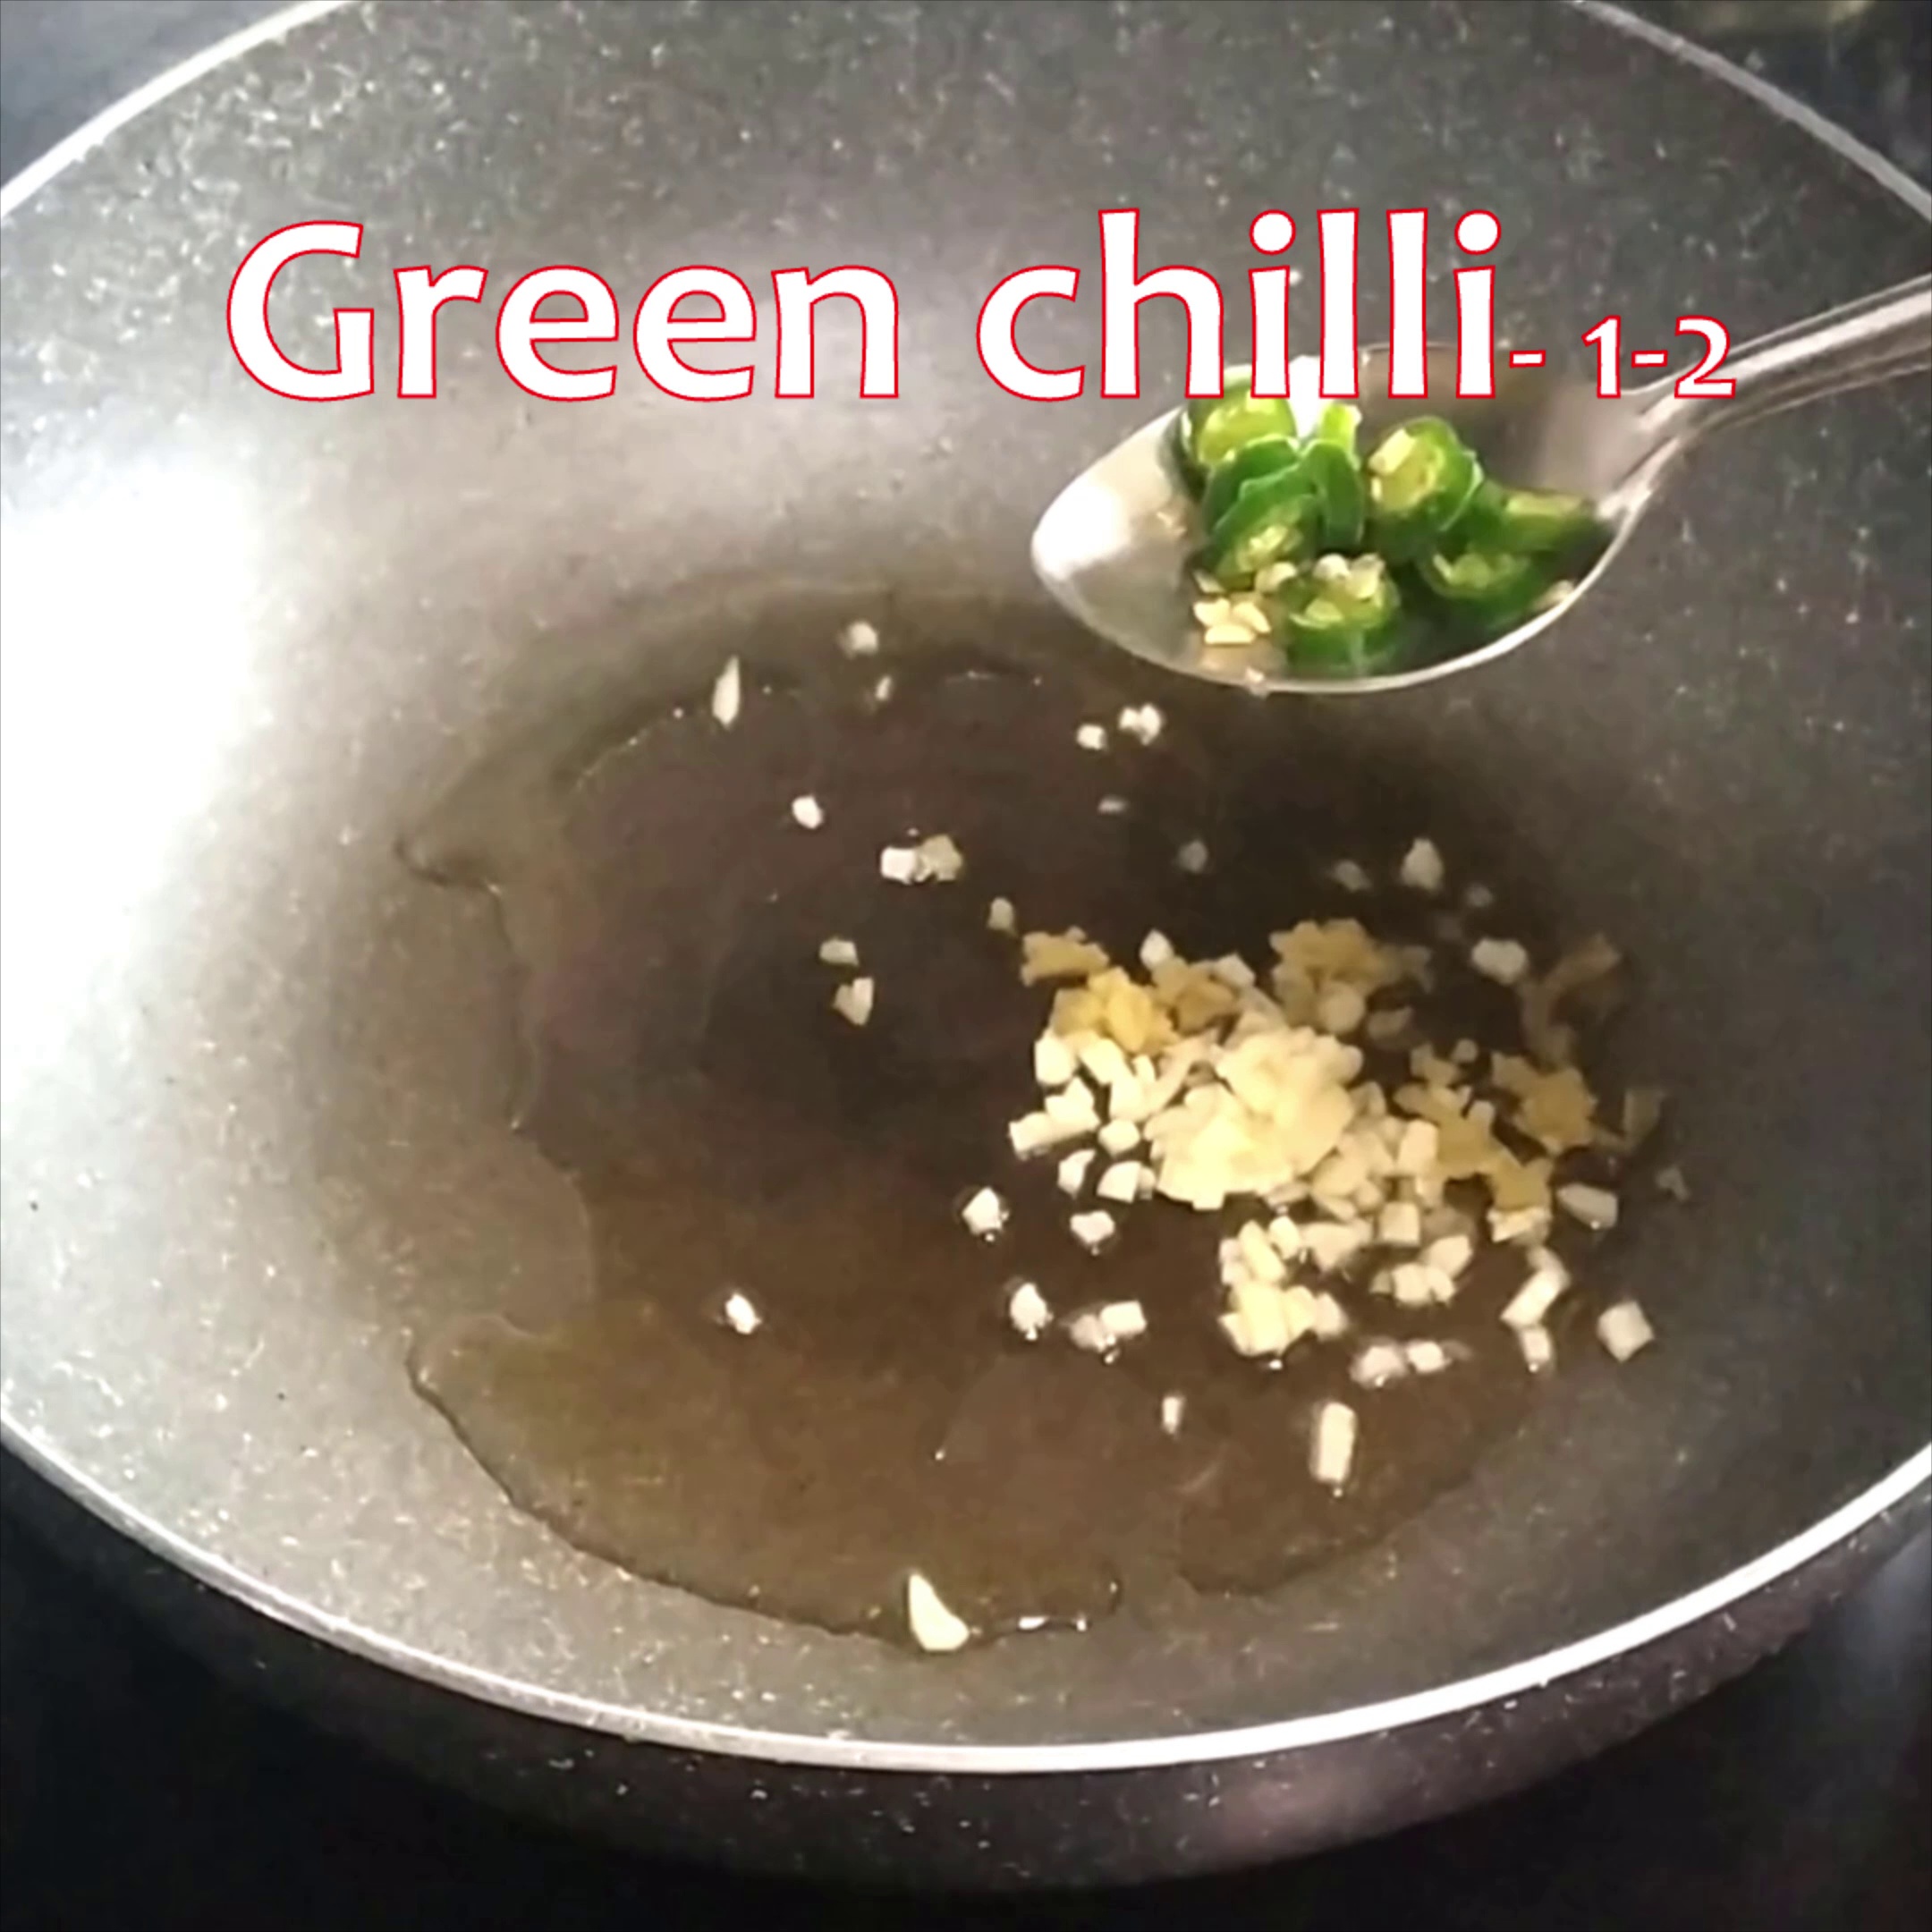 Step 2 - Heat oil in a pan and add chopped garlic, ginger and green chillies.